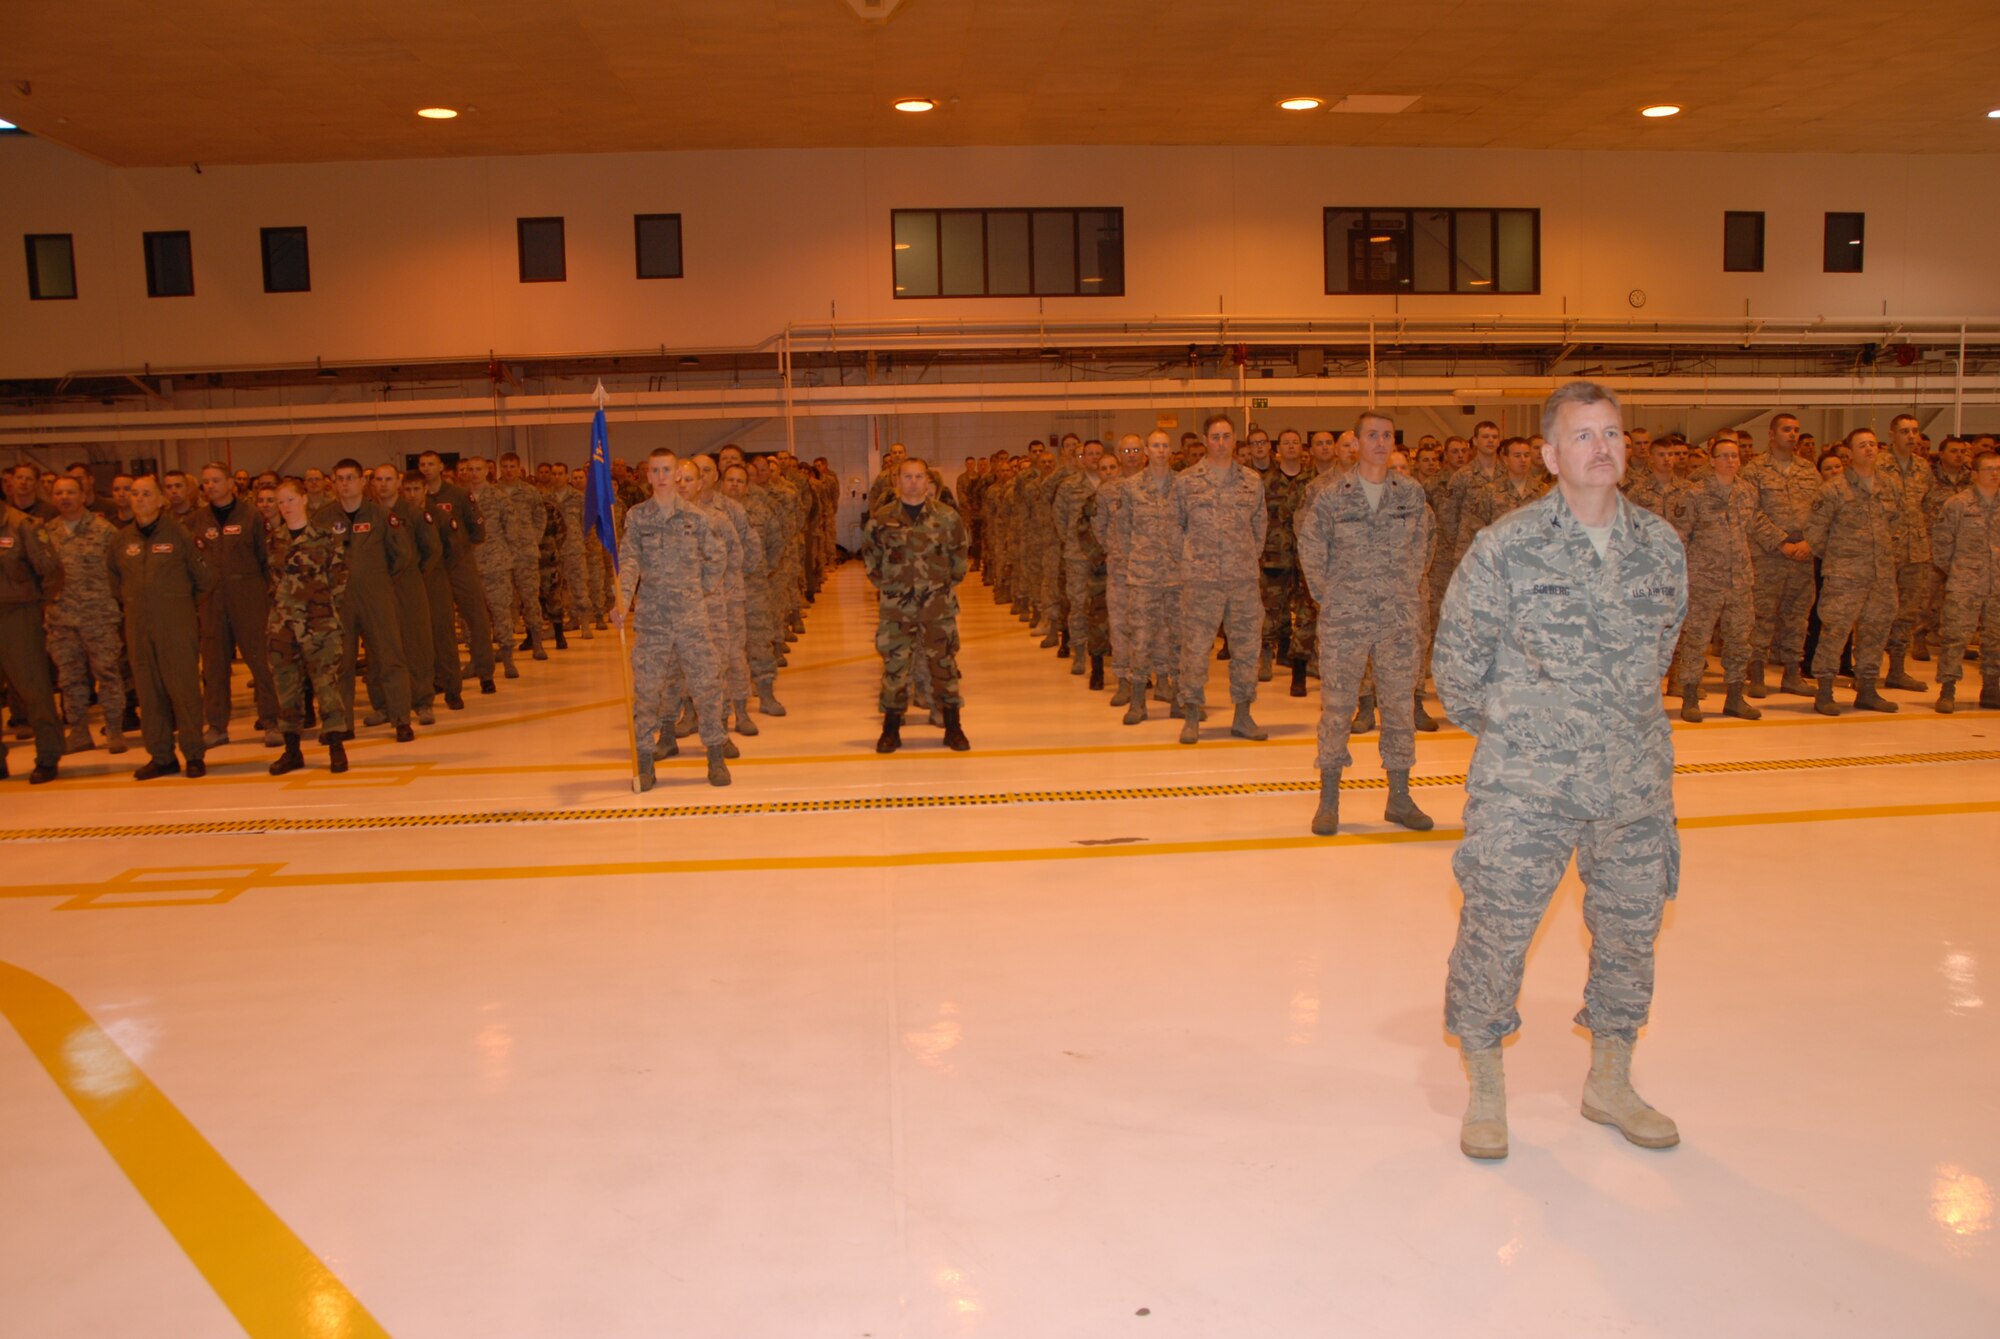 Airmen of the 119th Wing stand in formation during the Change of Command Ceremony that took place at the North Dakota Air National Guard on Dec. 5th.  Col. Robert Becklund relinquished command of the 119th Wing to Col. Rick Gibney during the ceremony.